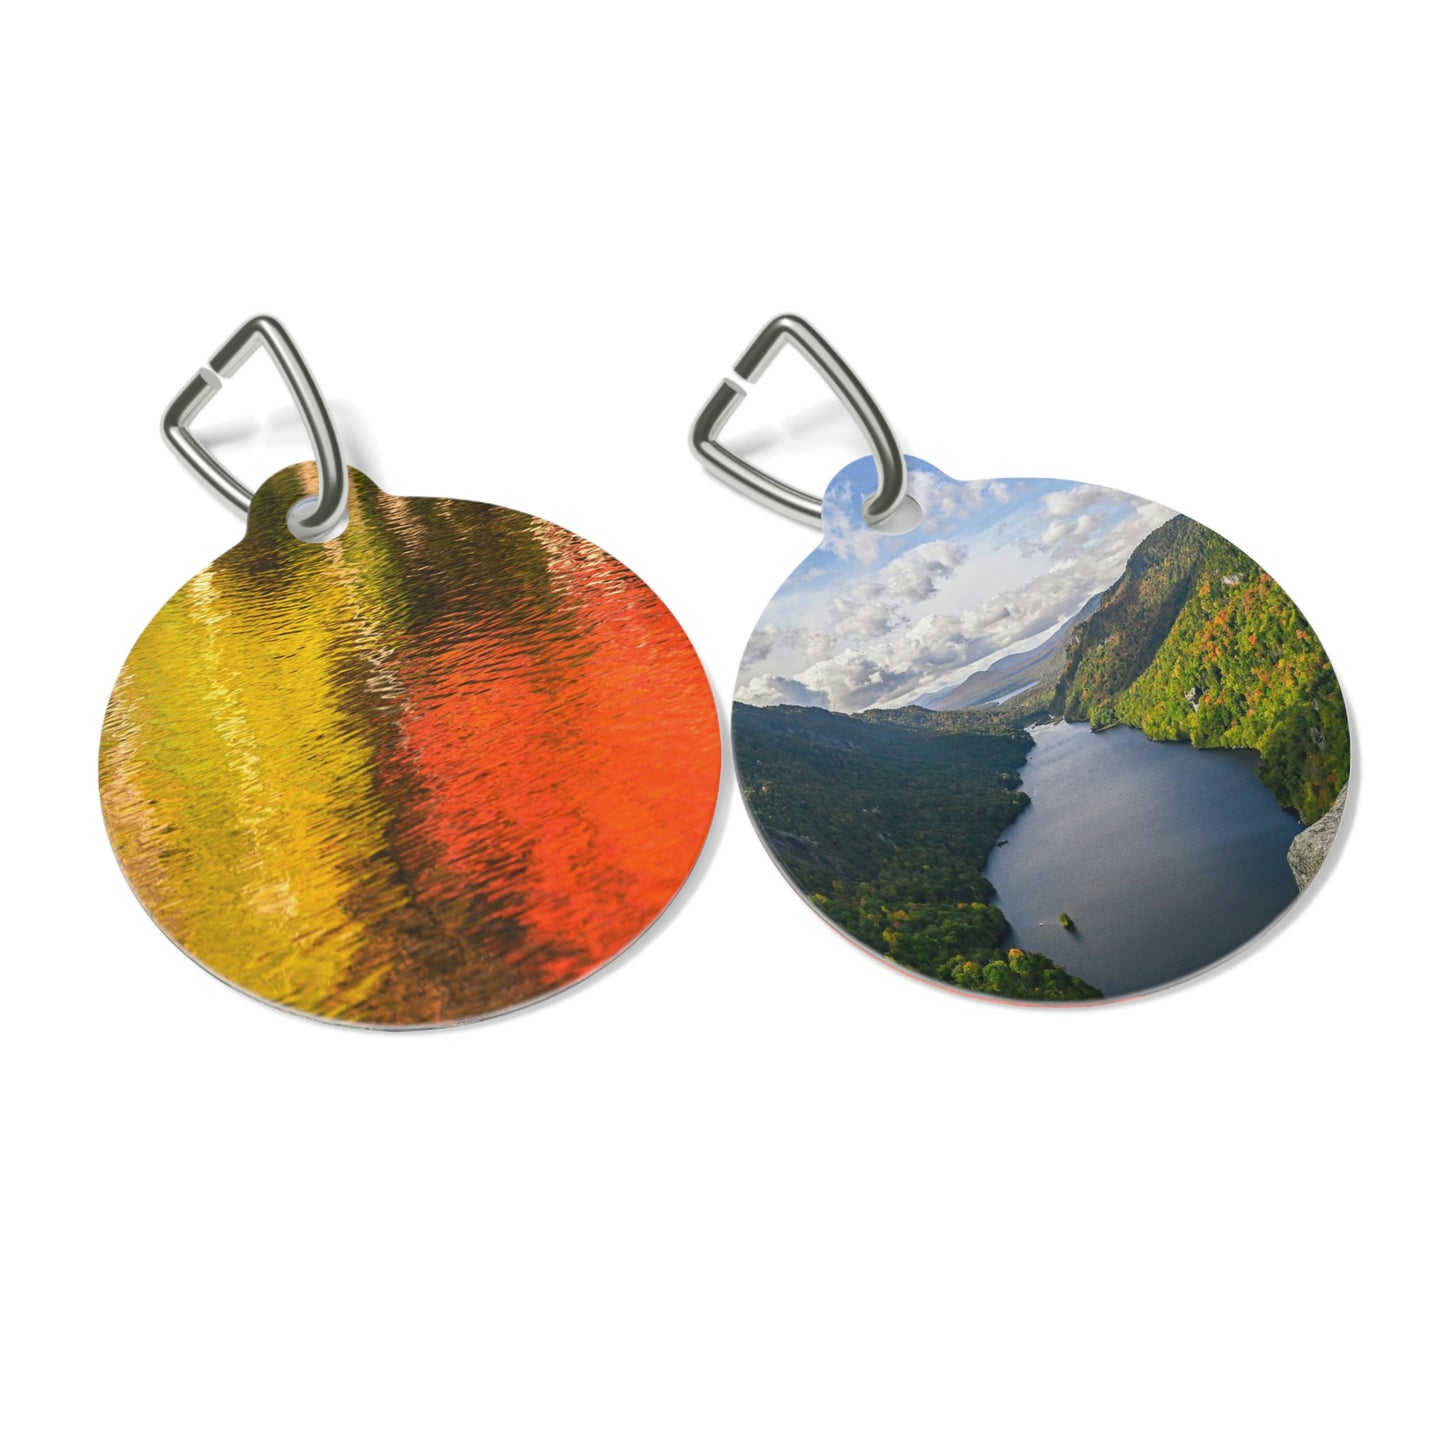 Pet Tag - Reflections of Autumn